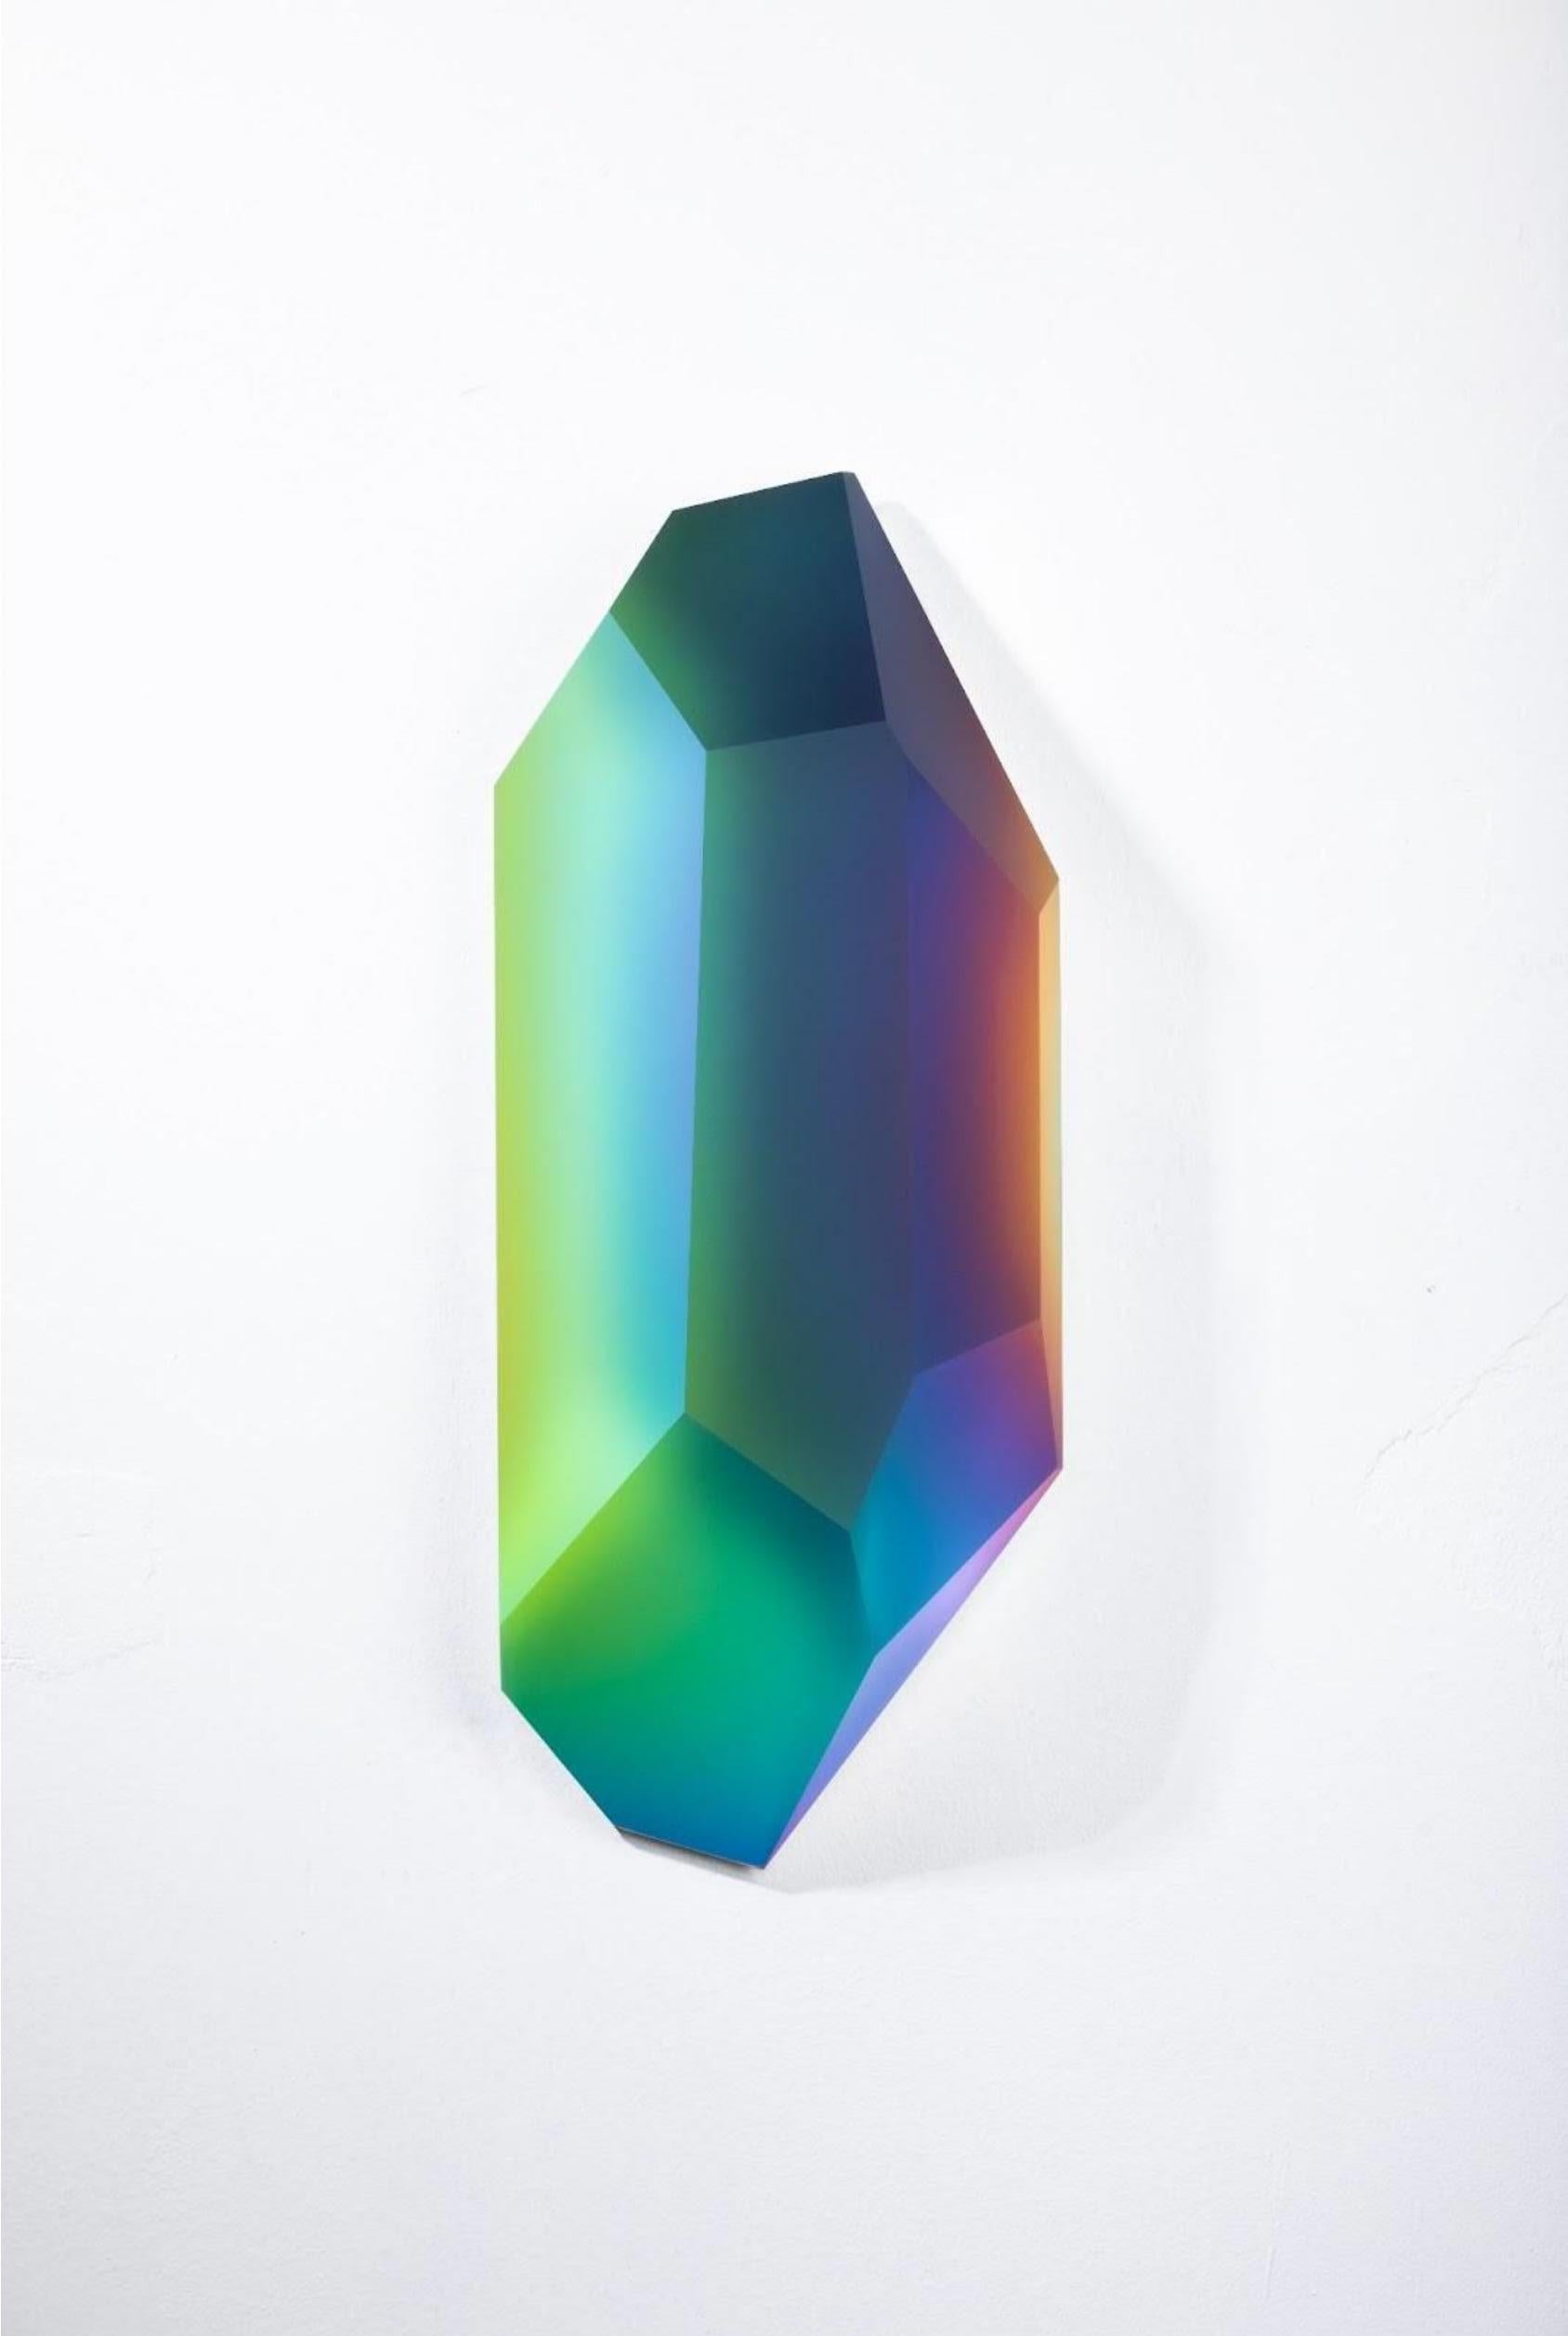 Pretty Mirage 0905 by Lukas Novak
Dimensions: W 12 x D 23 x H 54 cm
Materials: Cut Glass, Crystal, Color Gradient

The Pretty Mirage series is made out of wall crystals. It is a unique composition of cuts in glass and a color gradient. Lukas Novak